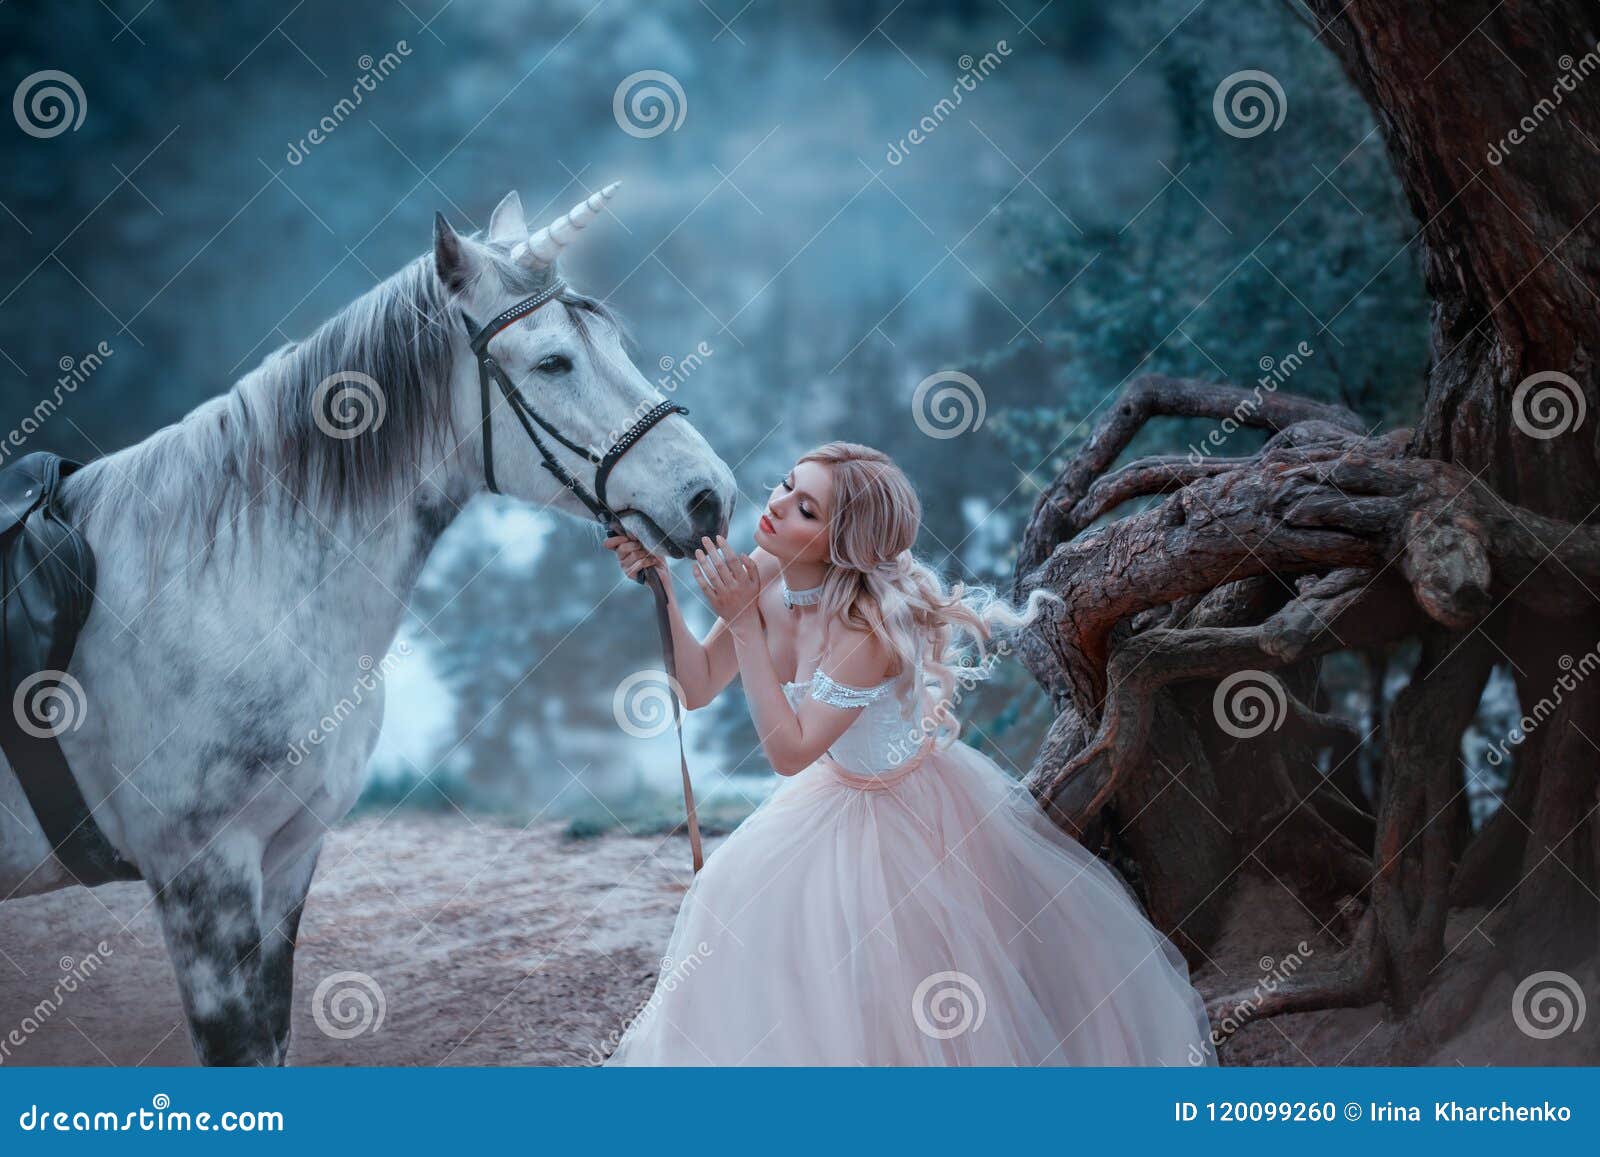 a fairy in a tender vintage dress hugs a unicorn. fantastic magical, radiant horse. background river and forest. blonde